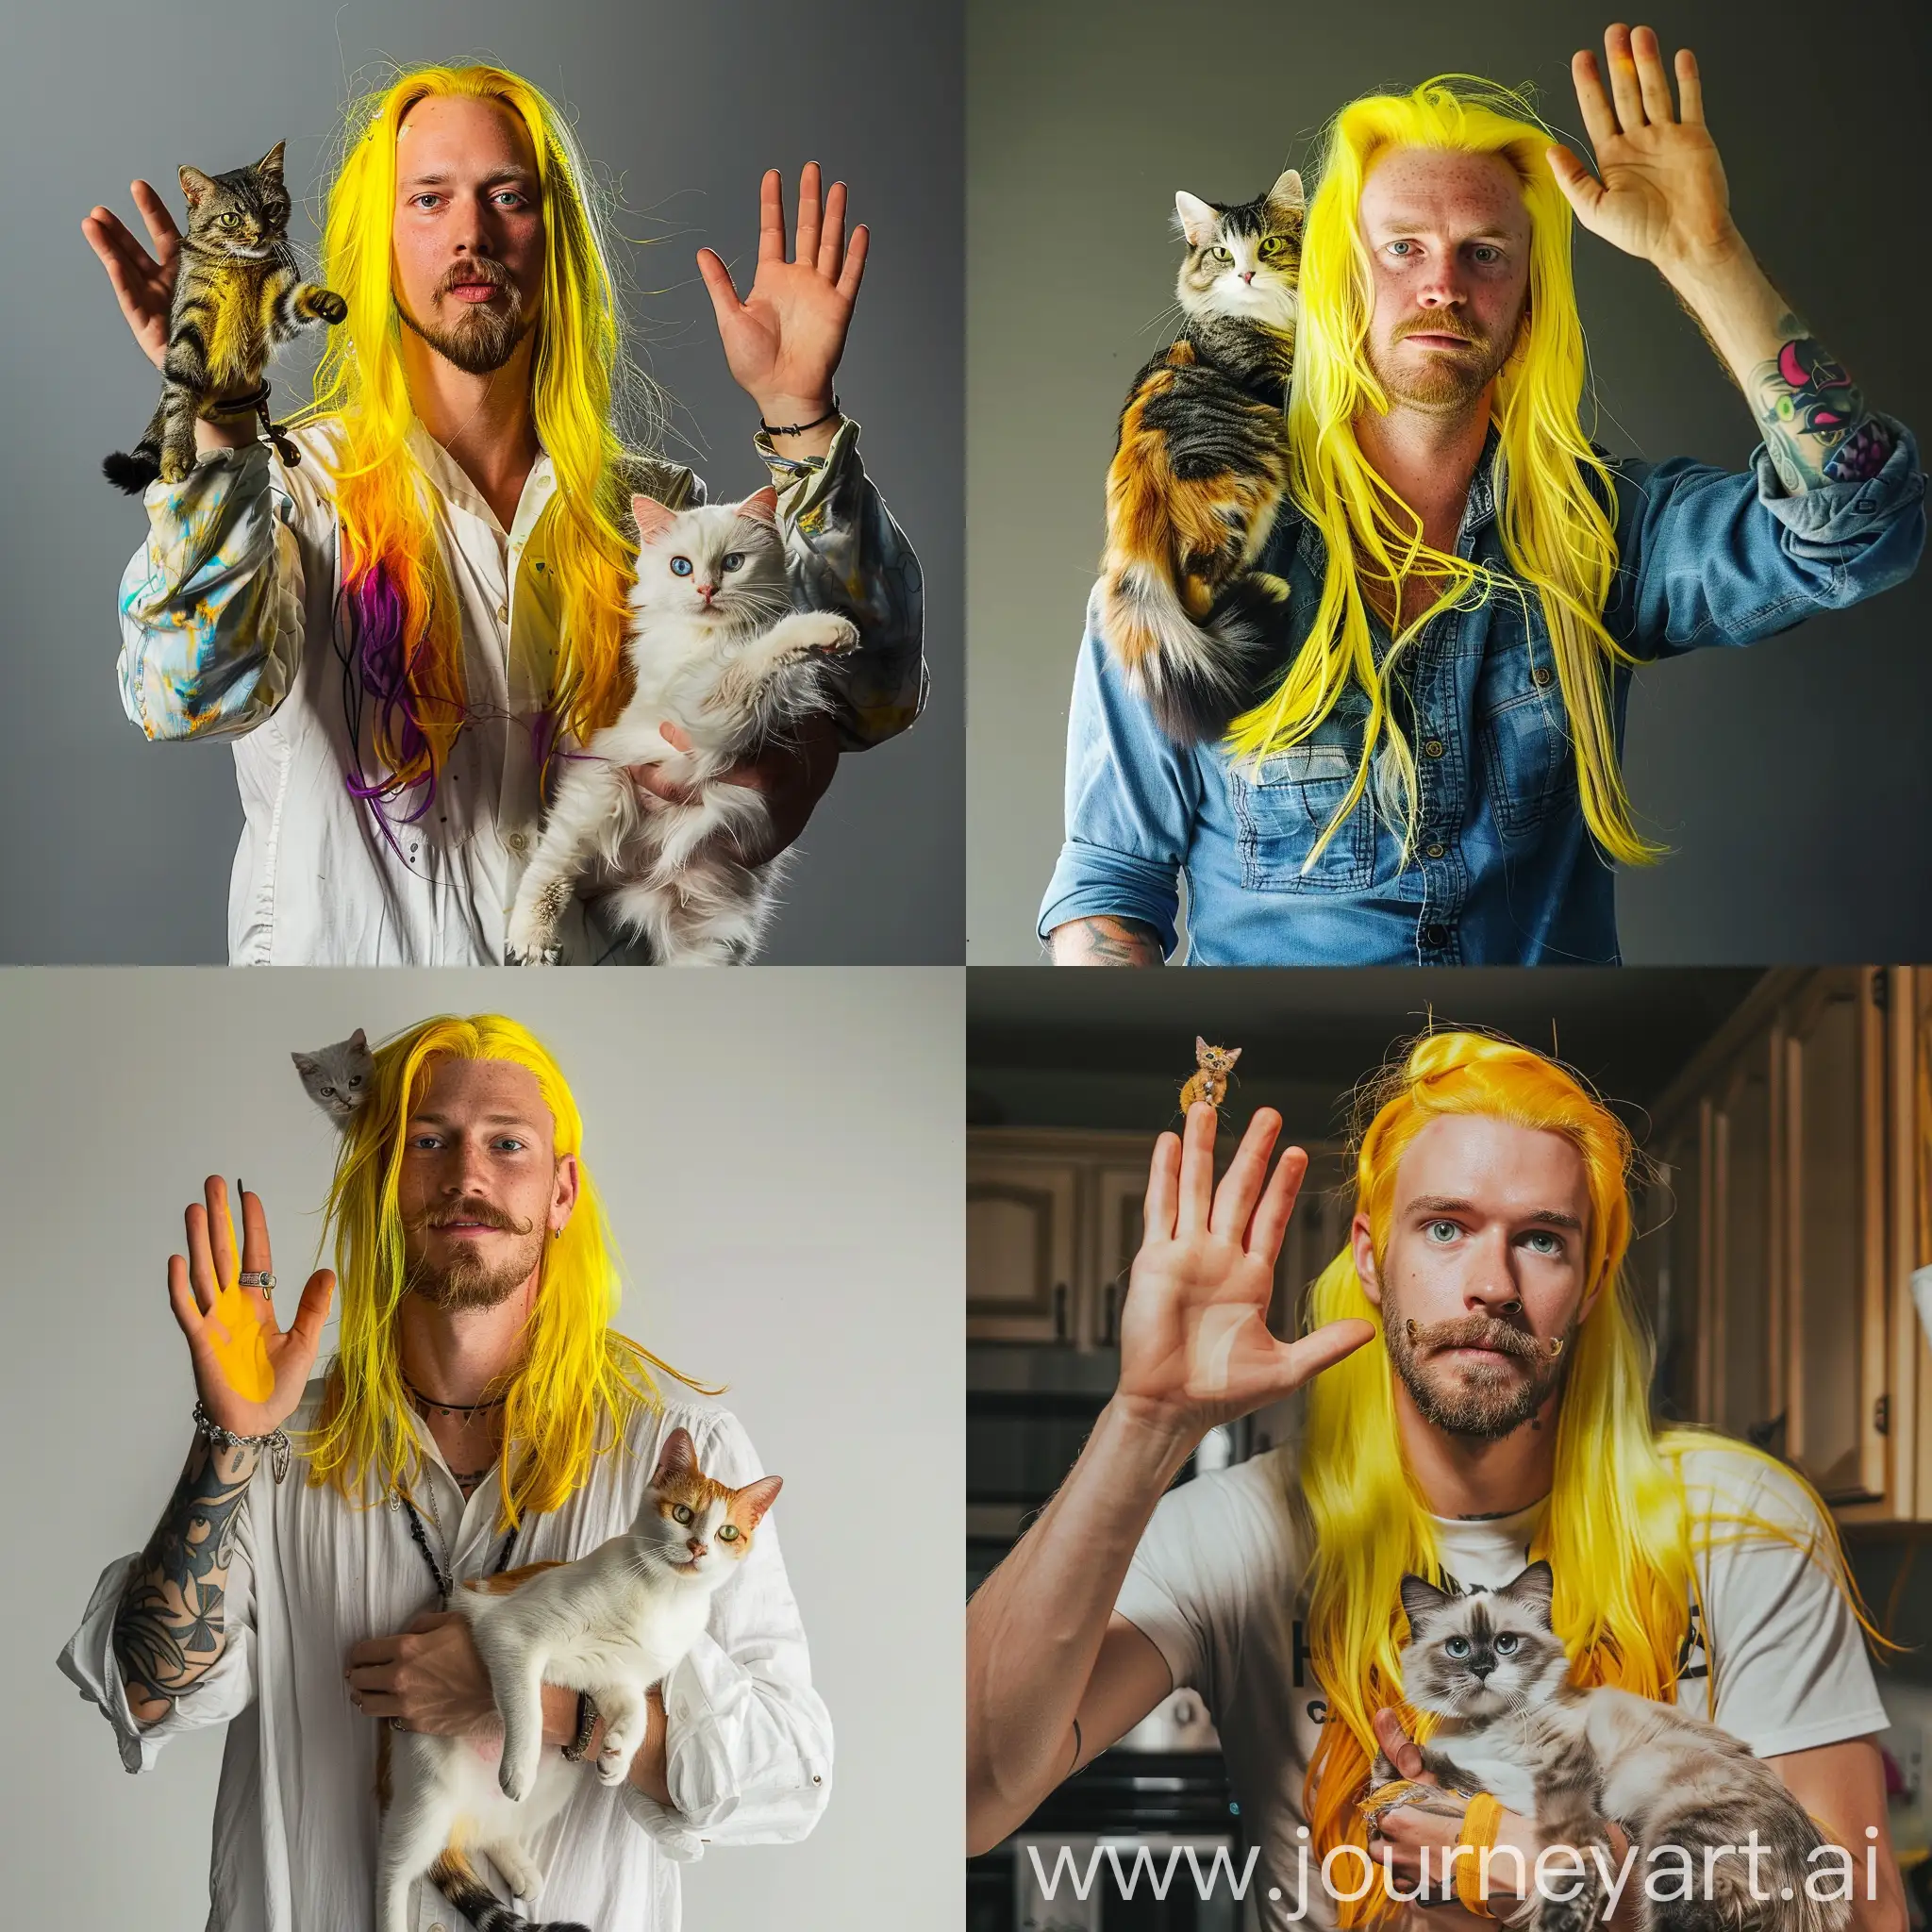 A white man, goatee, Long yellow hair, holding cat, and waving while looking at the camera